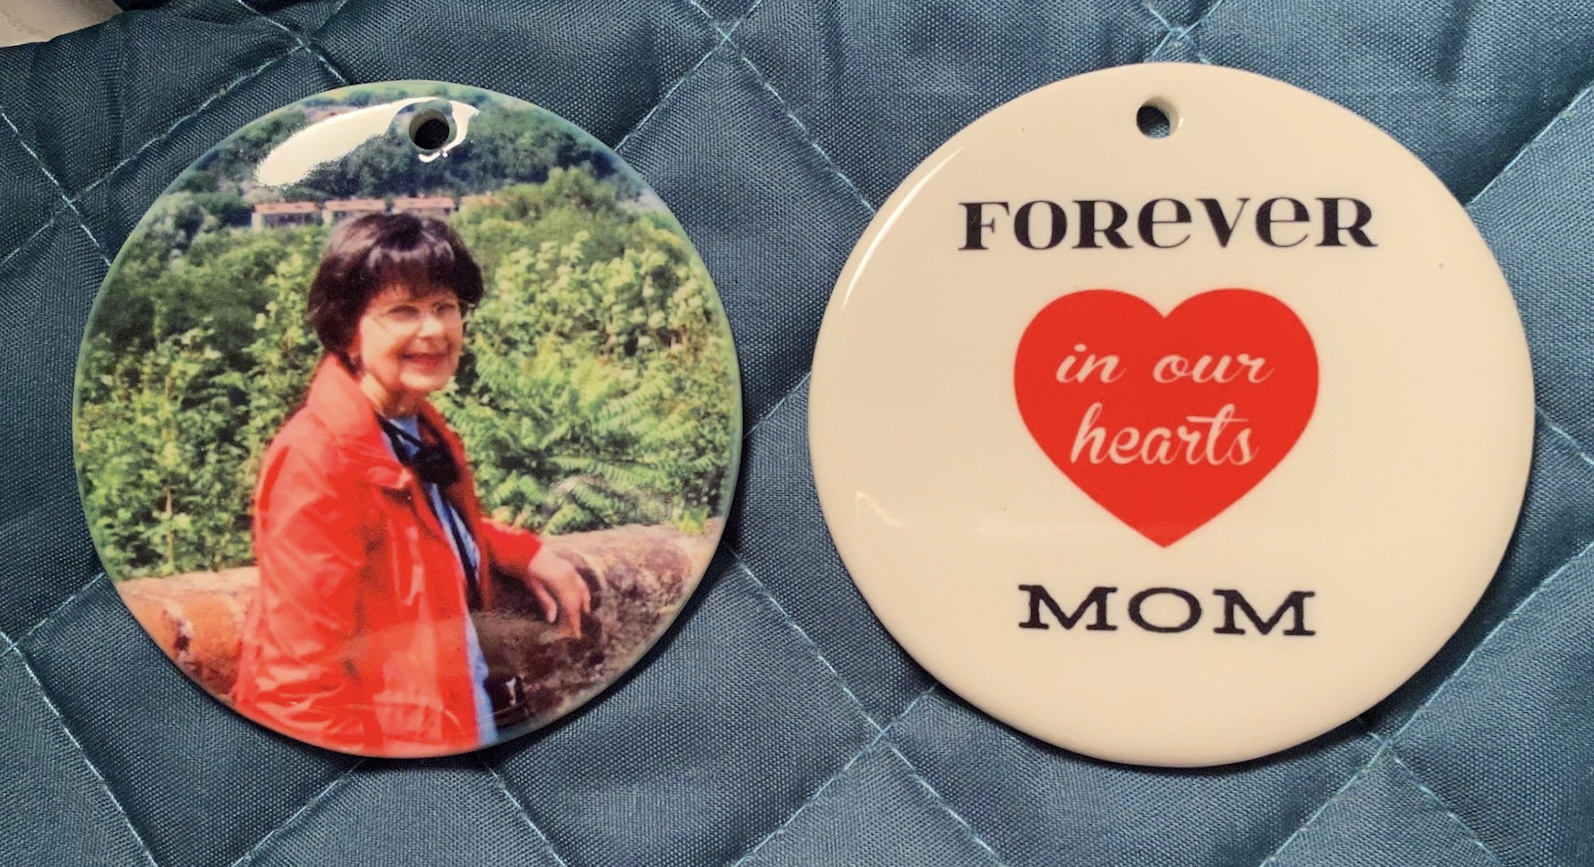 Memorial ornament made with sublimation printing